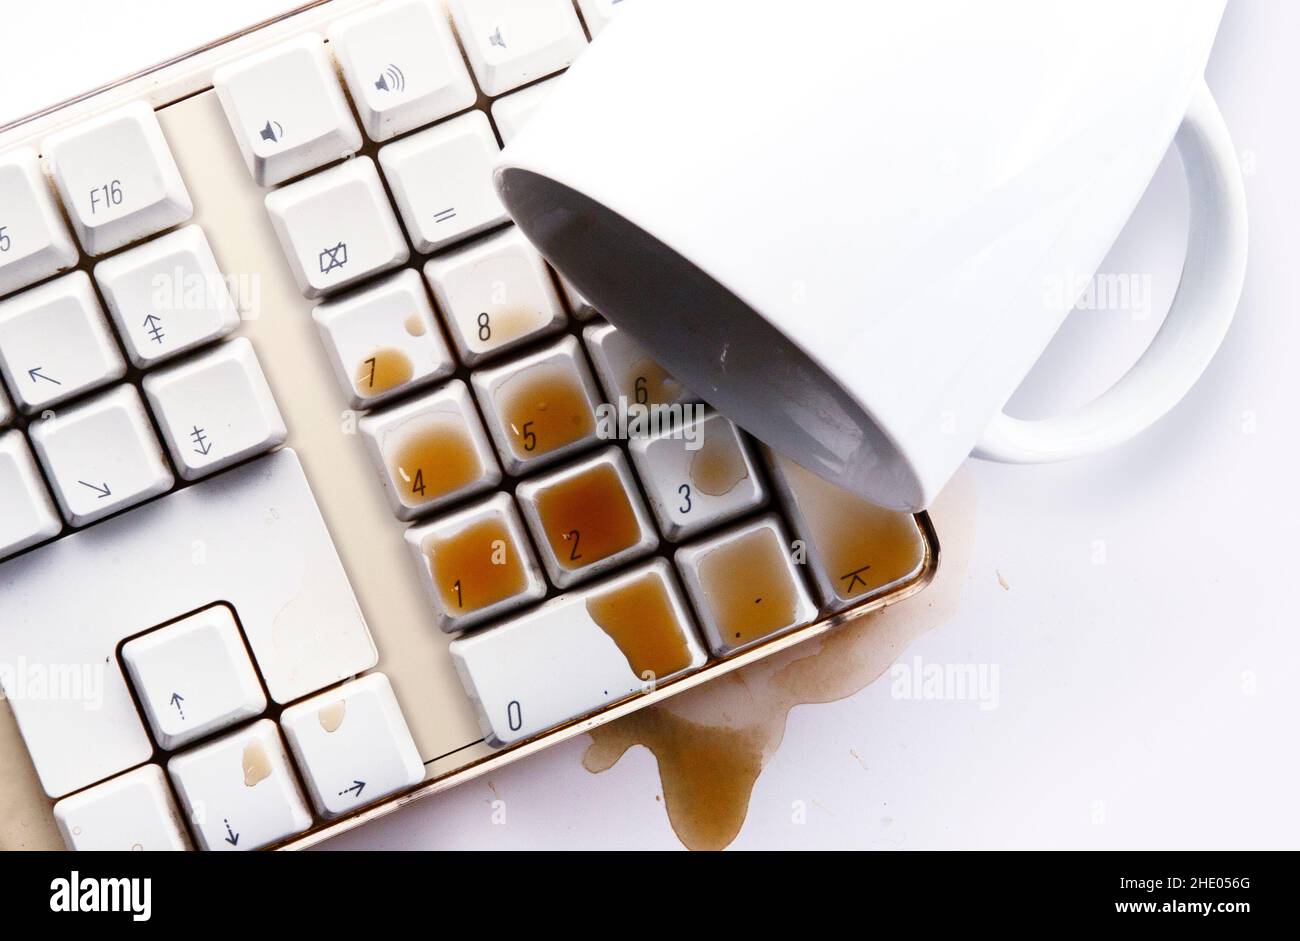 Coffee spilling over computer white keyboard Stock Photo